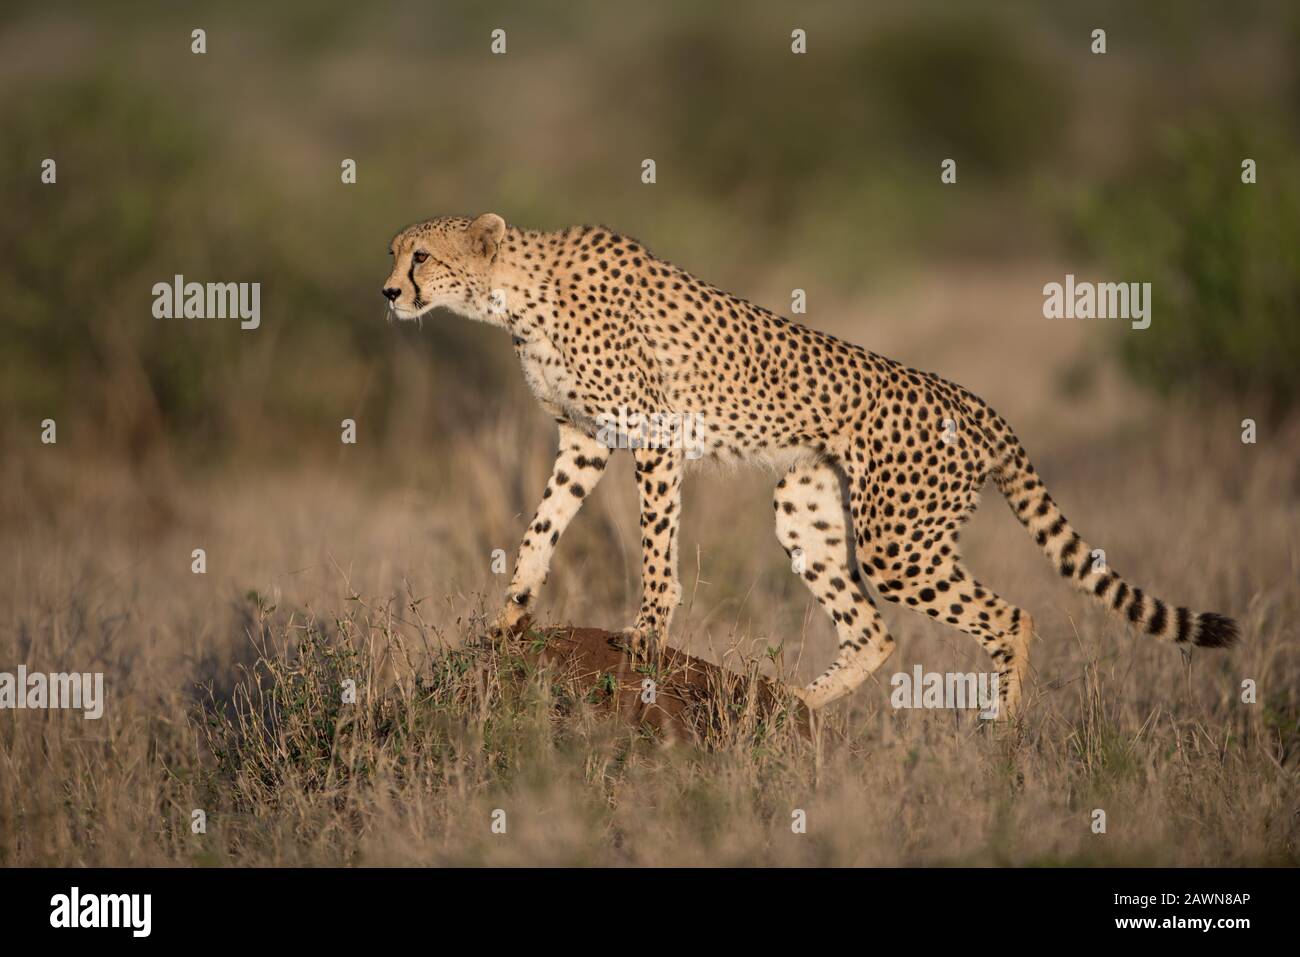 Beautiful cheetah hunting for prey with a blurred background Stock Photo